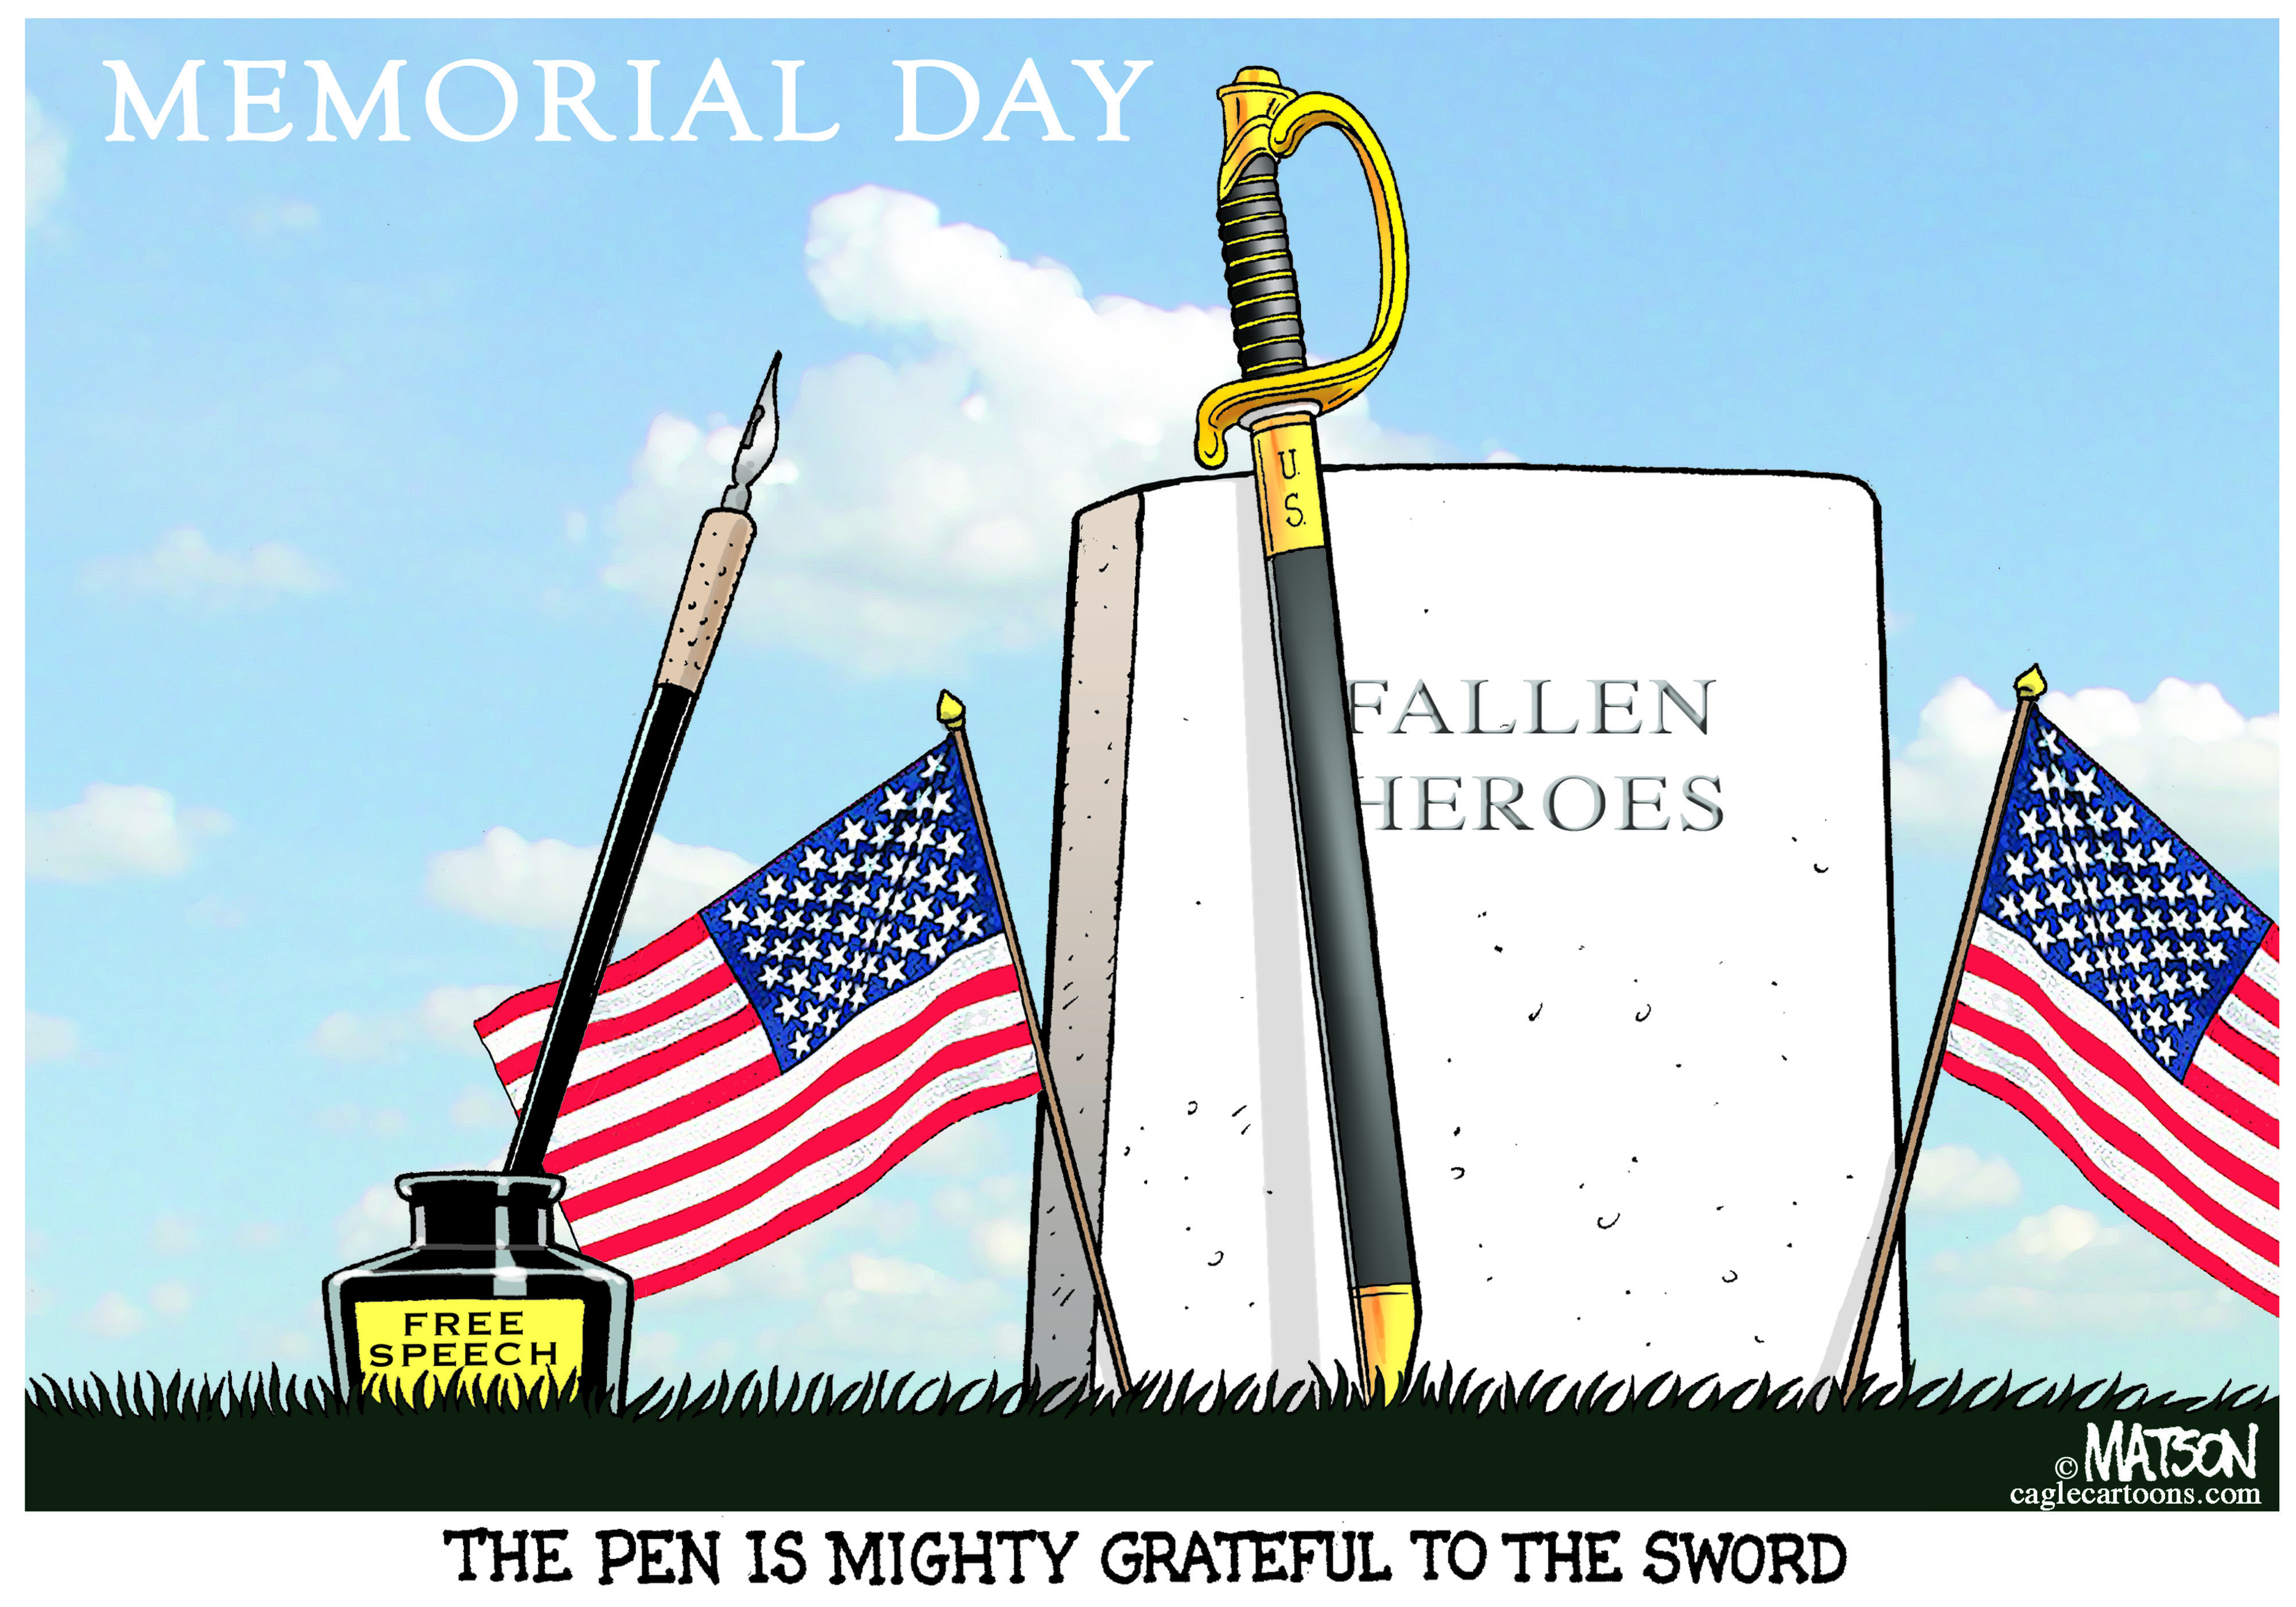 Miner Editorial Memorial Day: It’s not just a barbecue day.